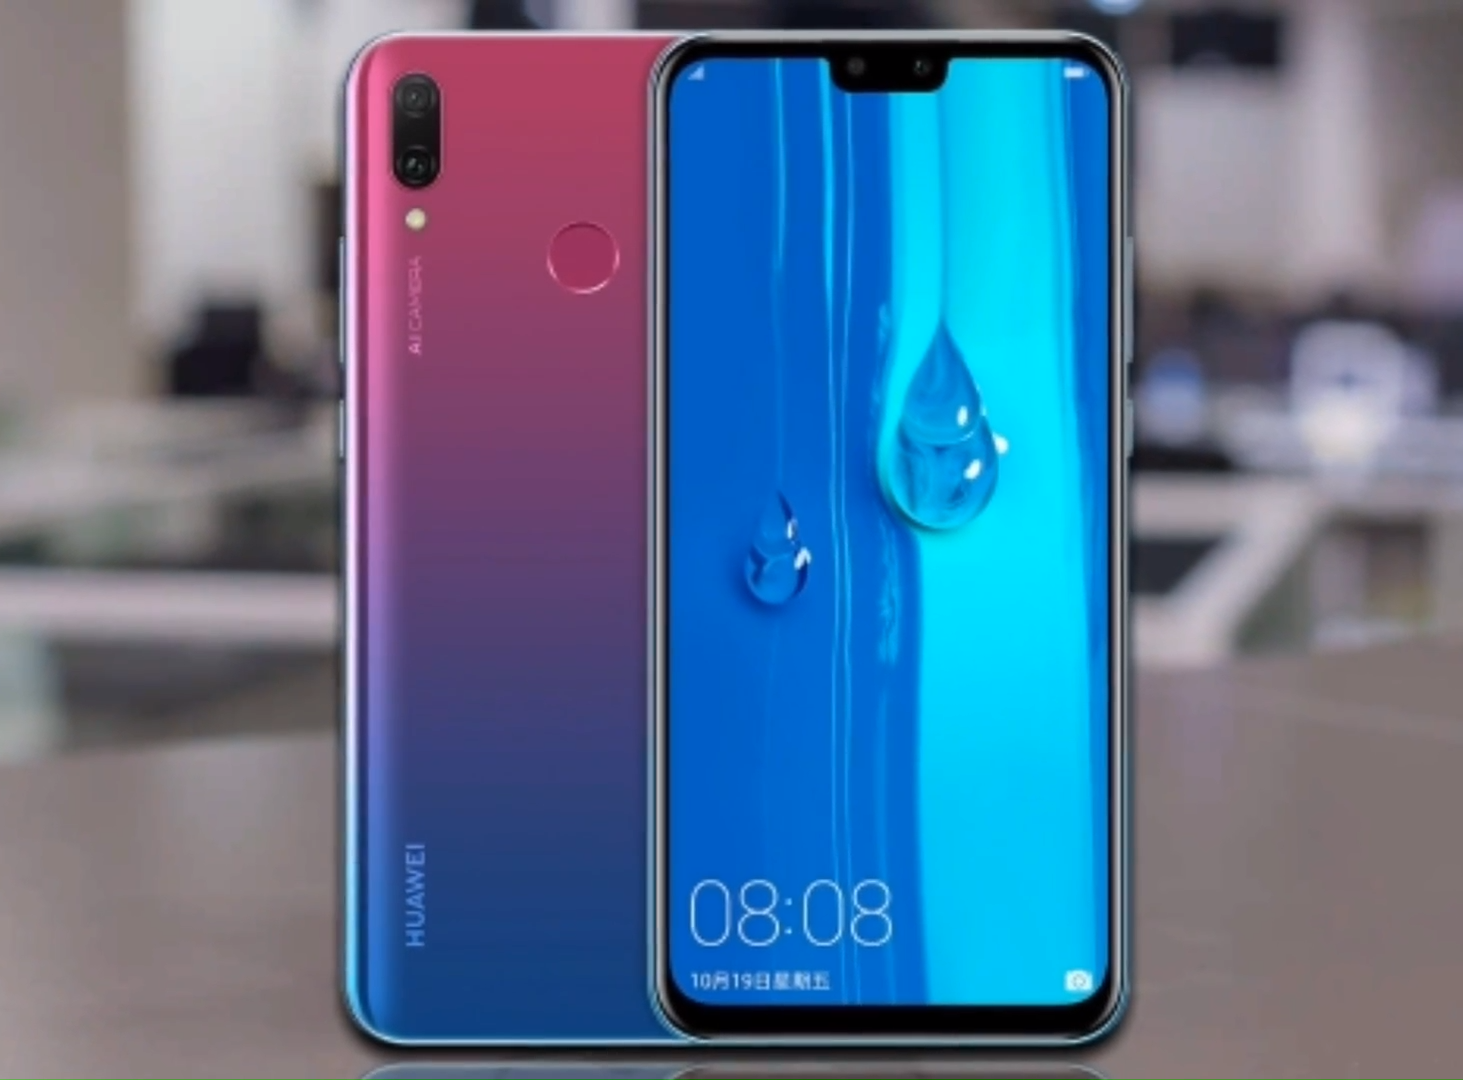 Smartphones Huawei Enjoy 9 Plus and Enjoy Max: advantages and disadvantages